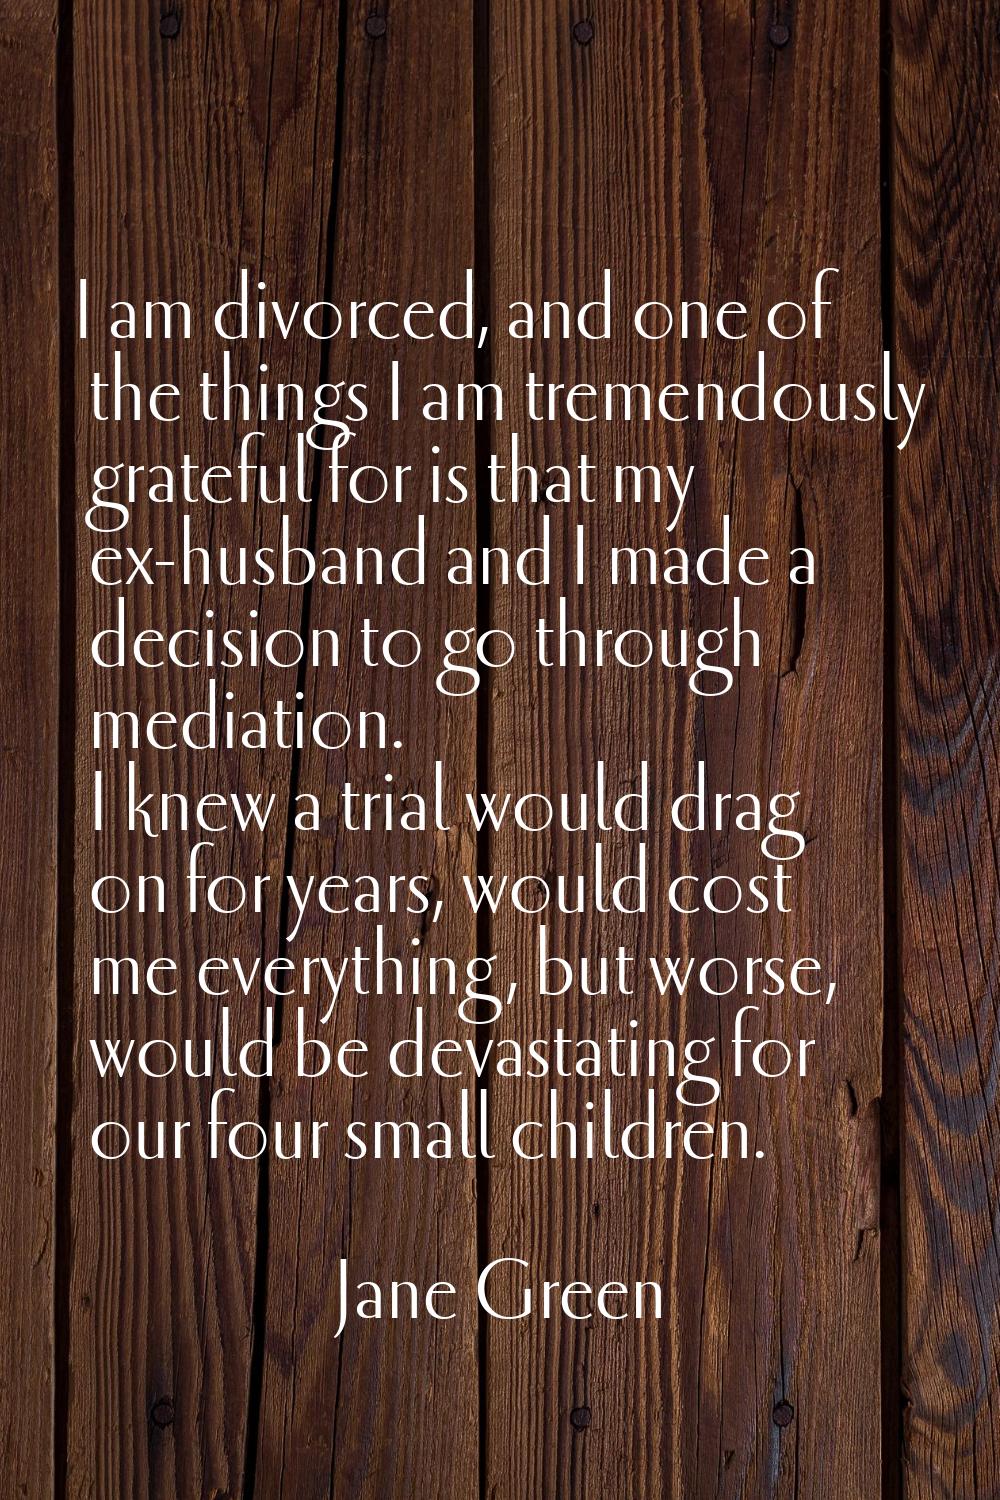 I am divorced, and one of the things I am tremendously grateful for is that my ex-husband and I mad